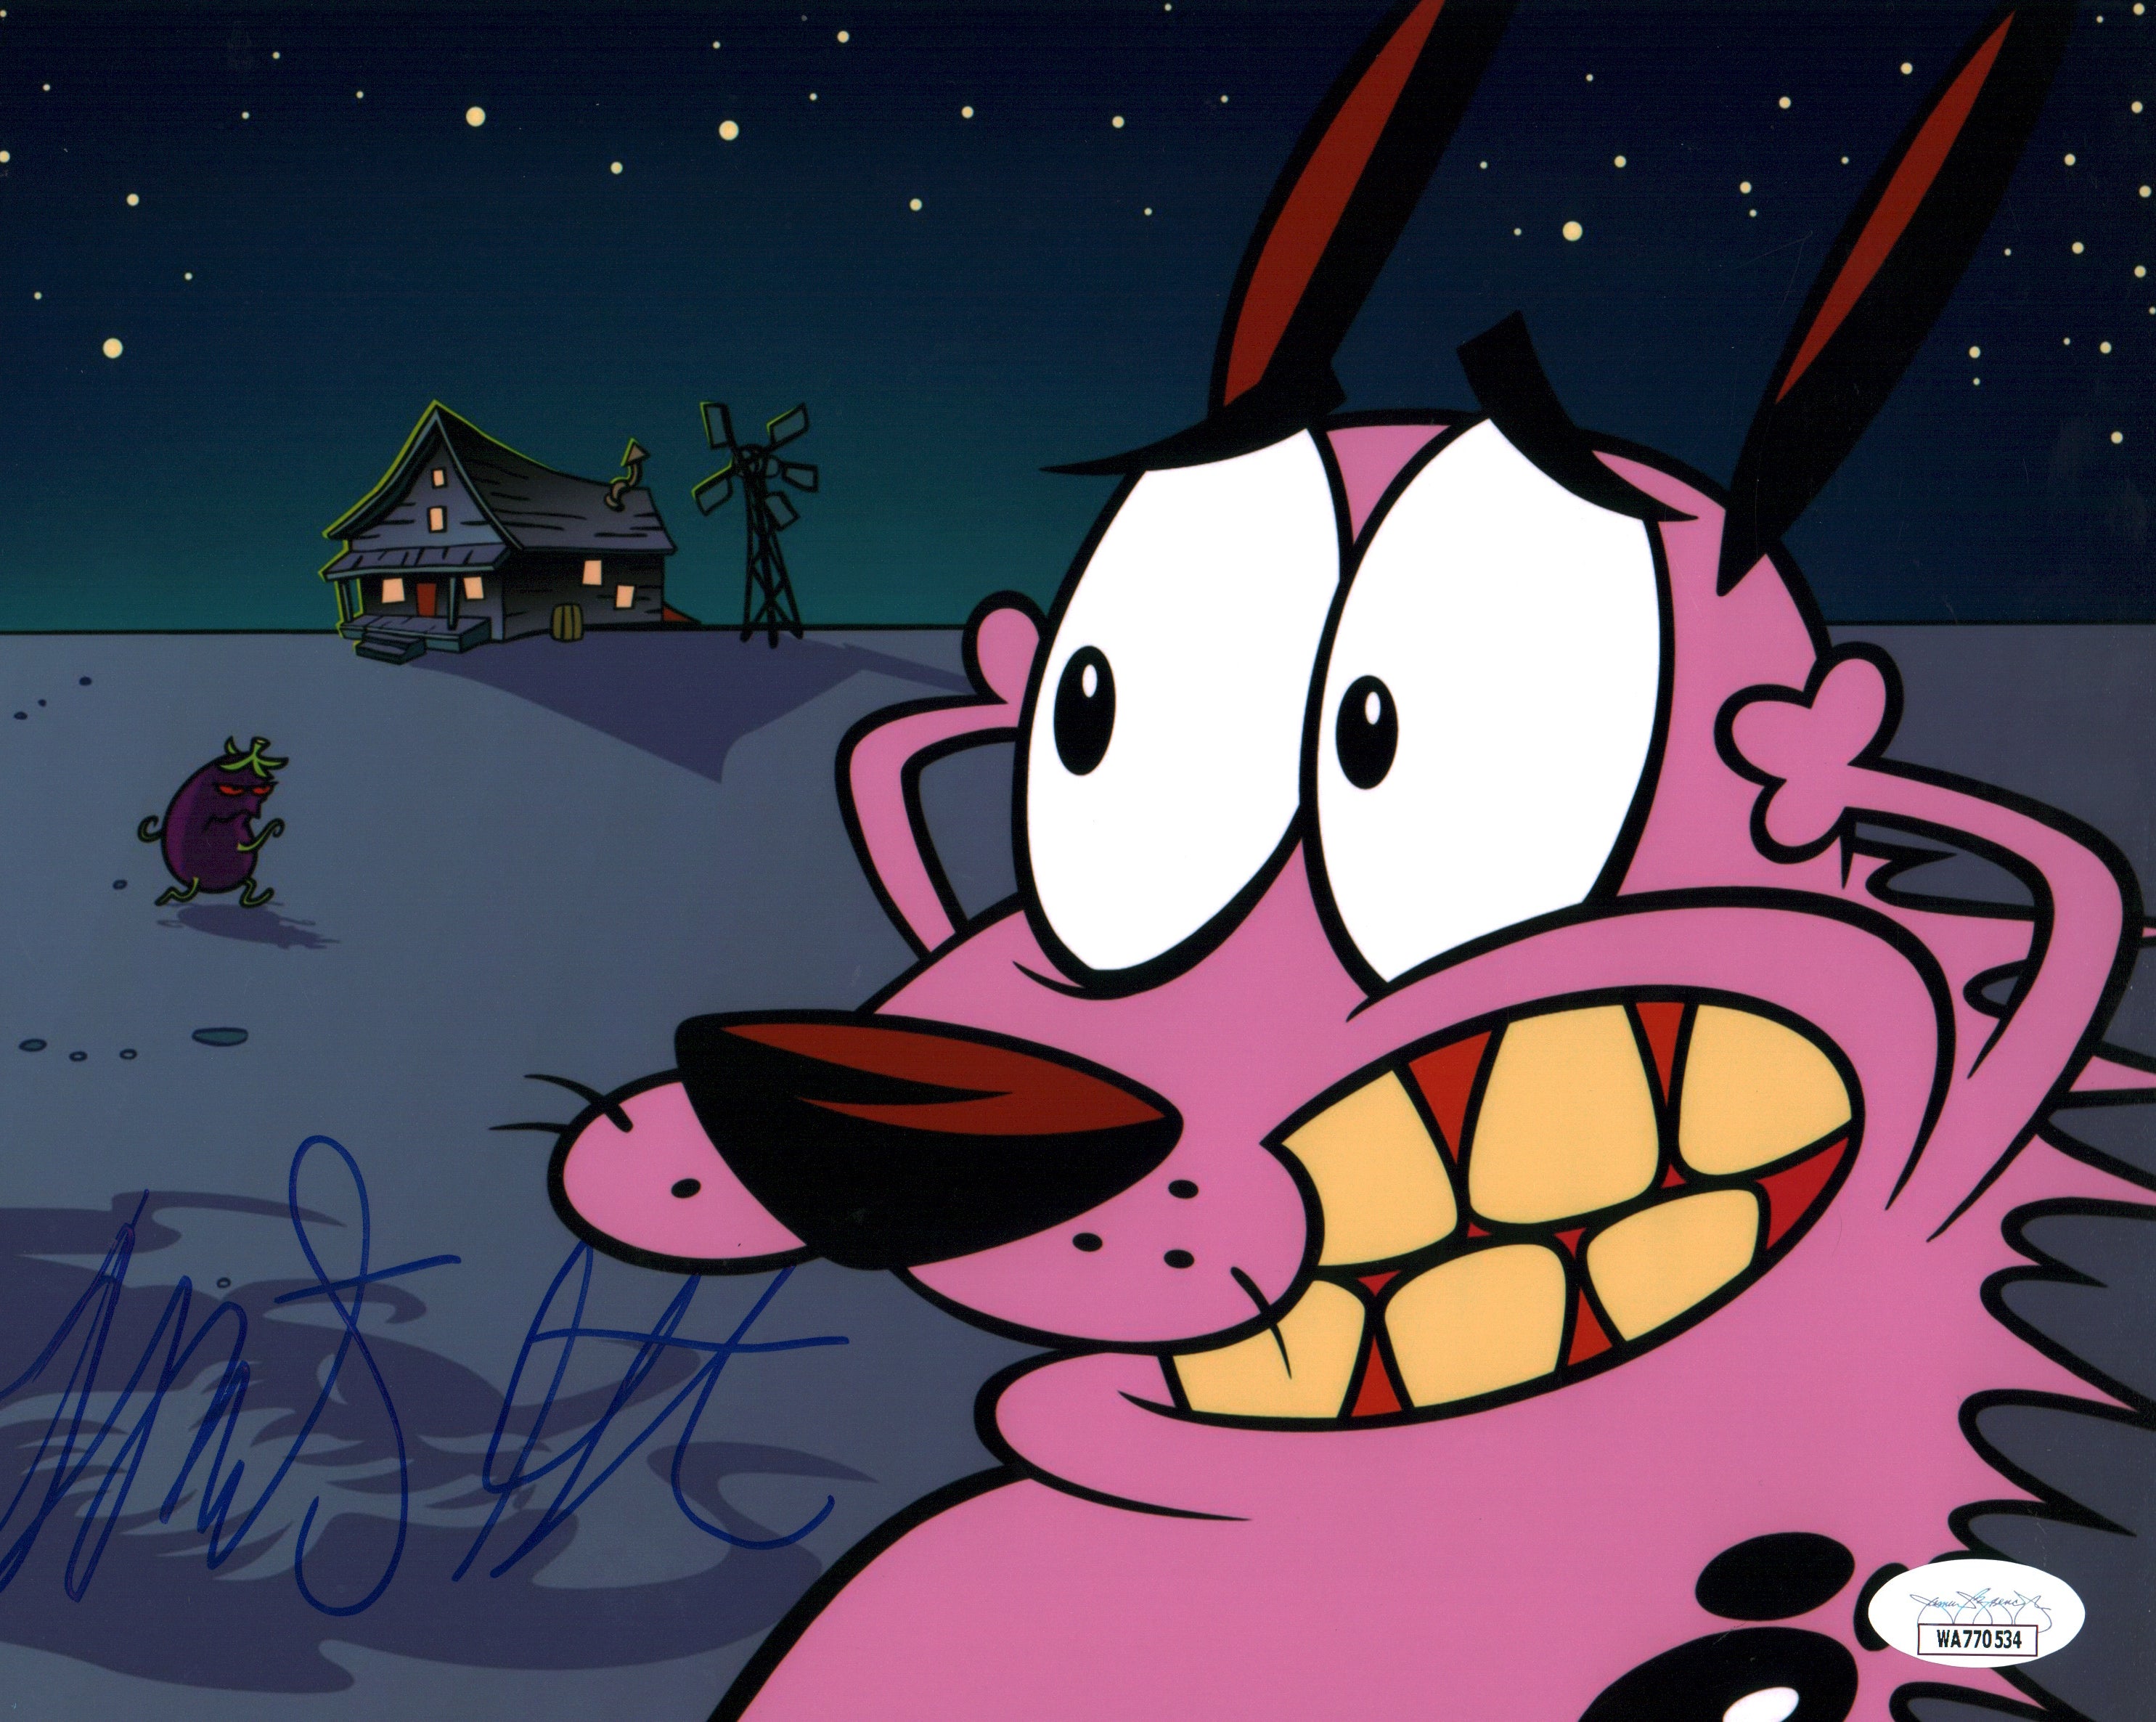 Marty Grabstein Courage the Cowardly Dog 8x10 Signed Photo JSA Certified Autograph